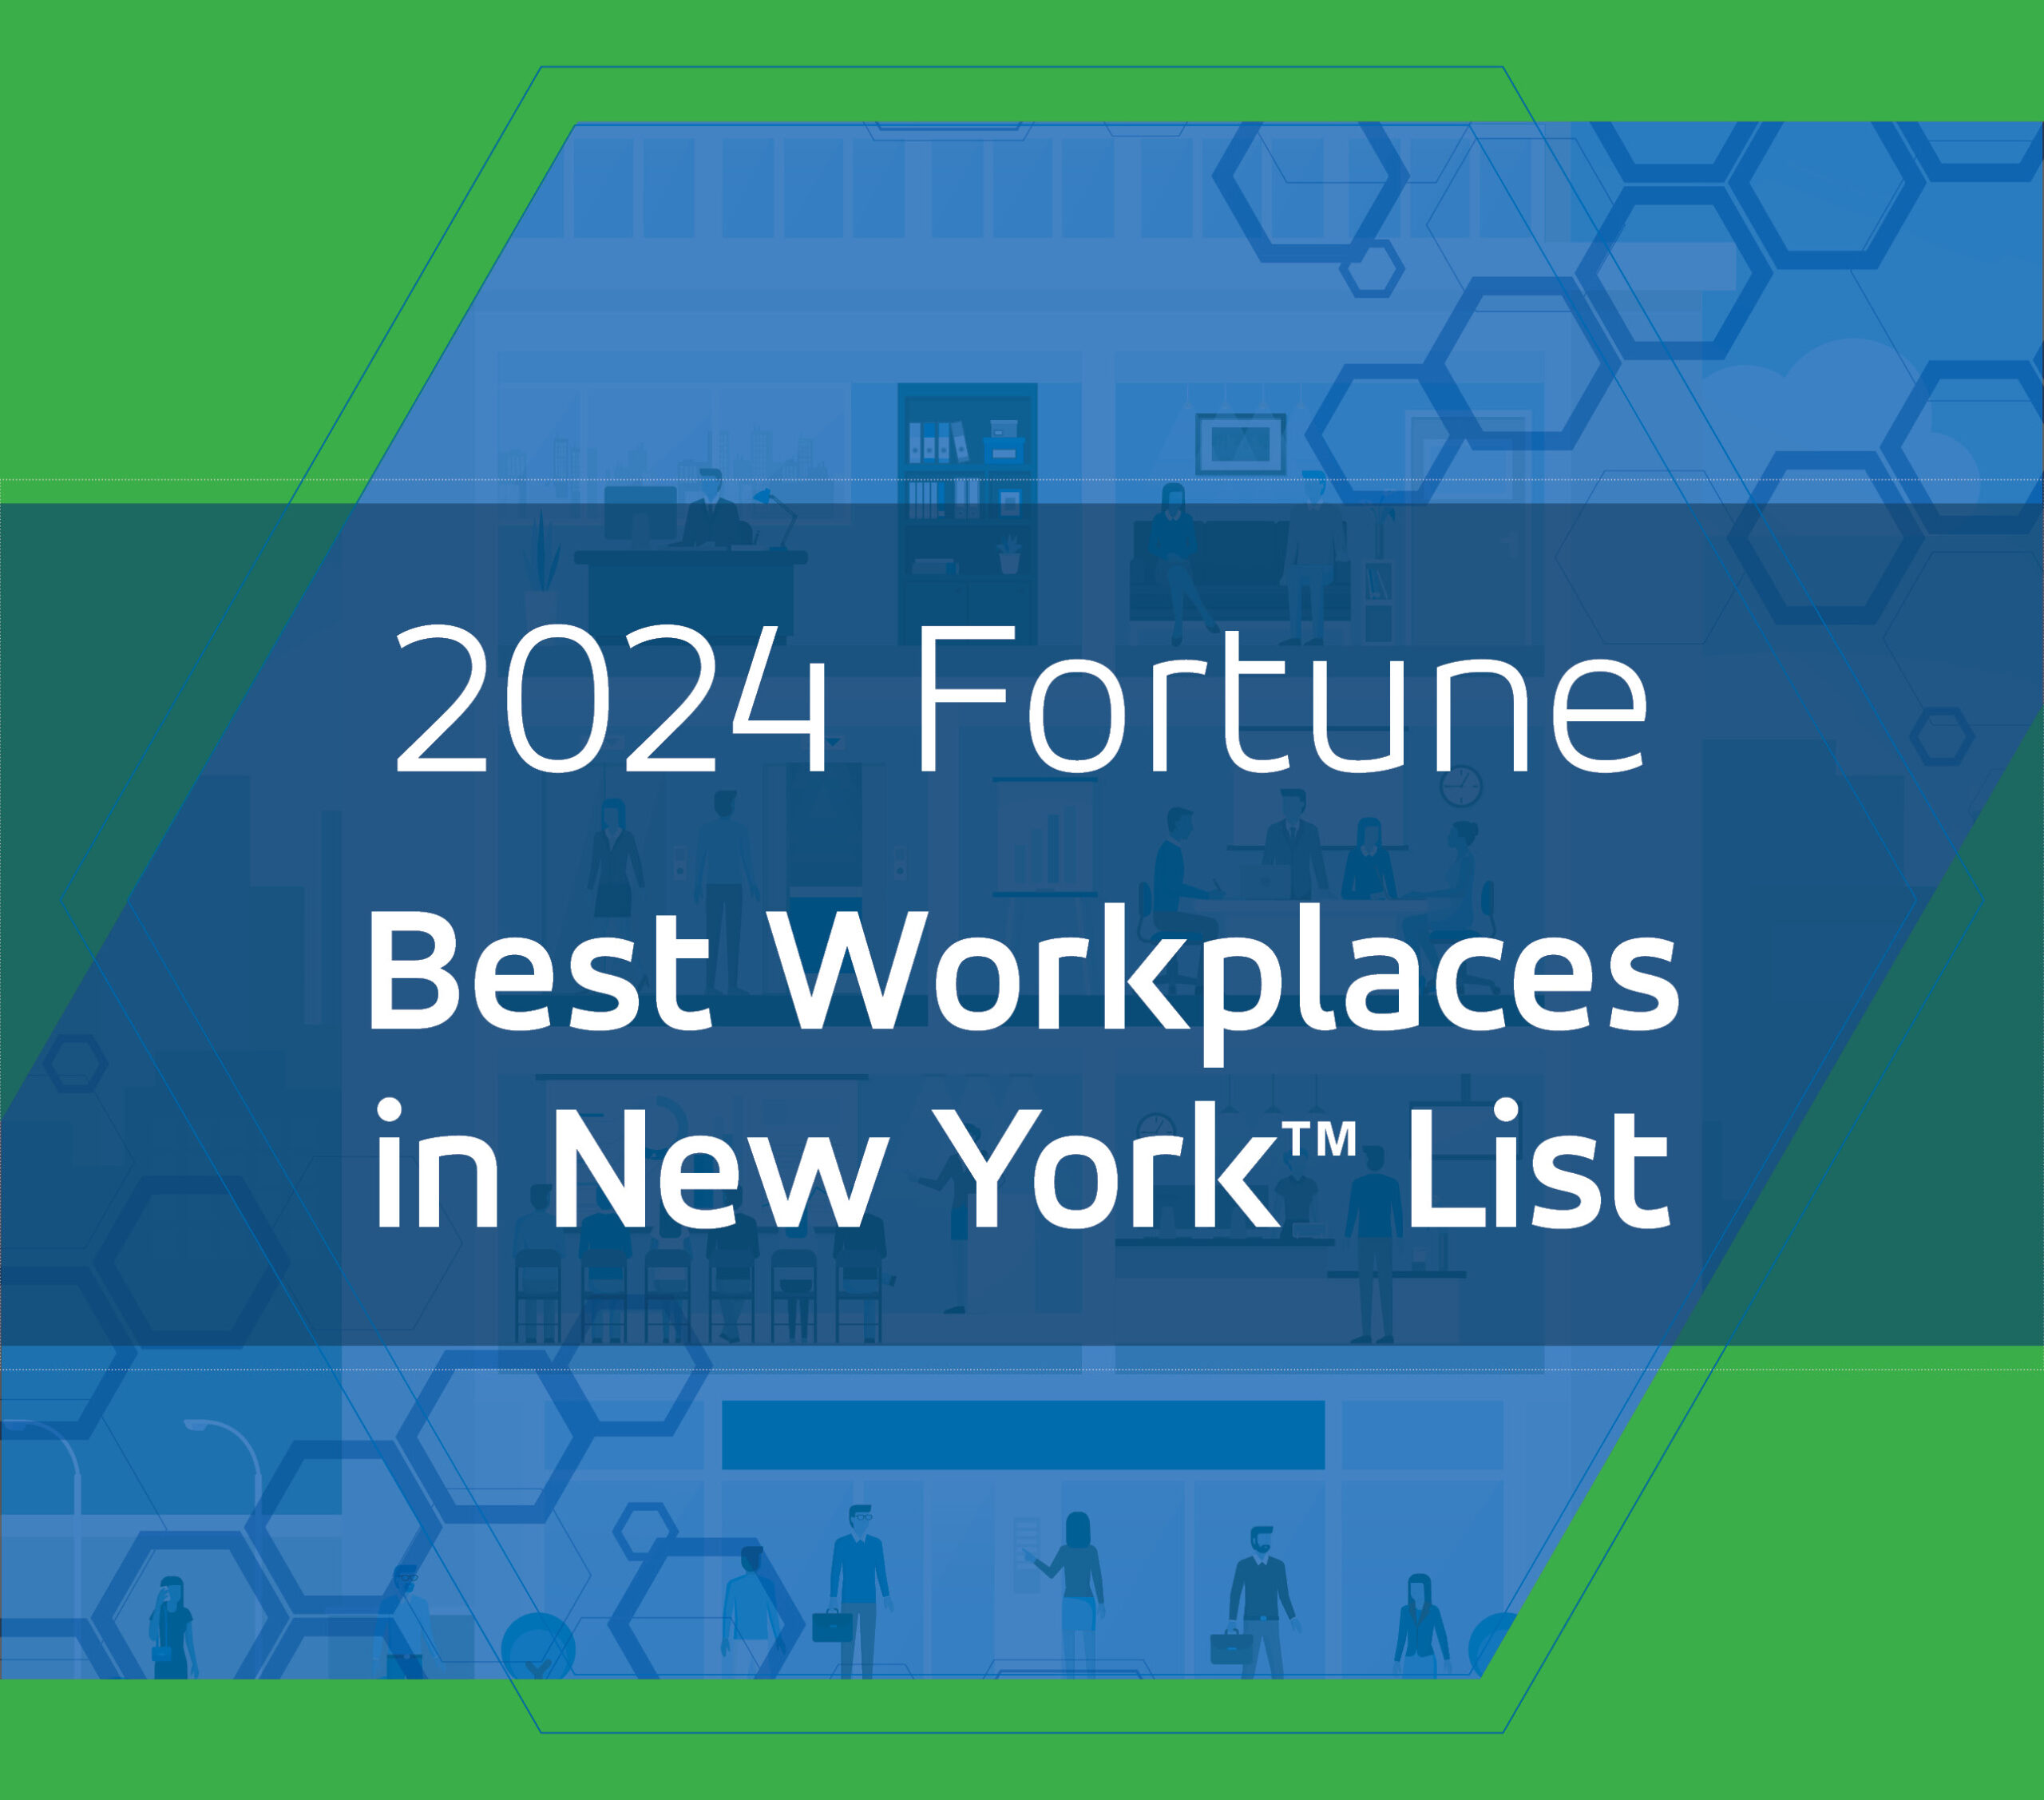 2024 Fortune Best Workplaces in New York List